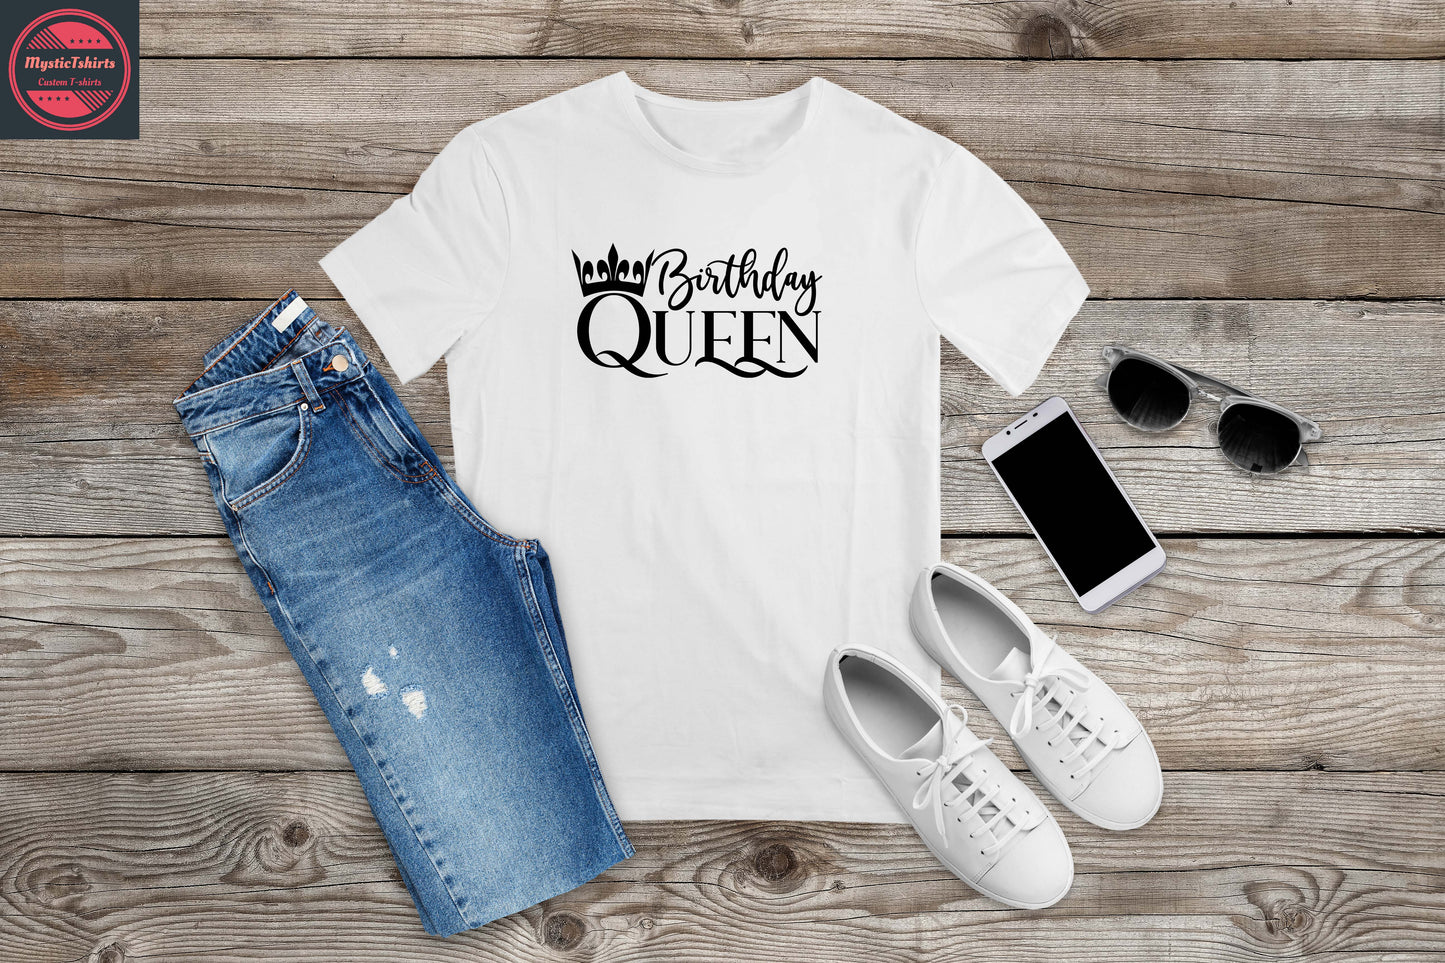 029. BIRTHDAY QUEEN Custom Made Shirt, Personalized T-Shirt, Custom Text, Make Your Own Shirt, Custom Tee